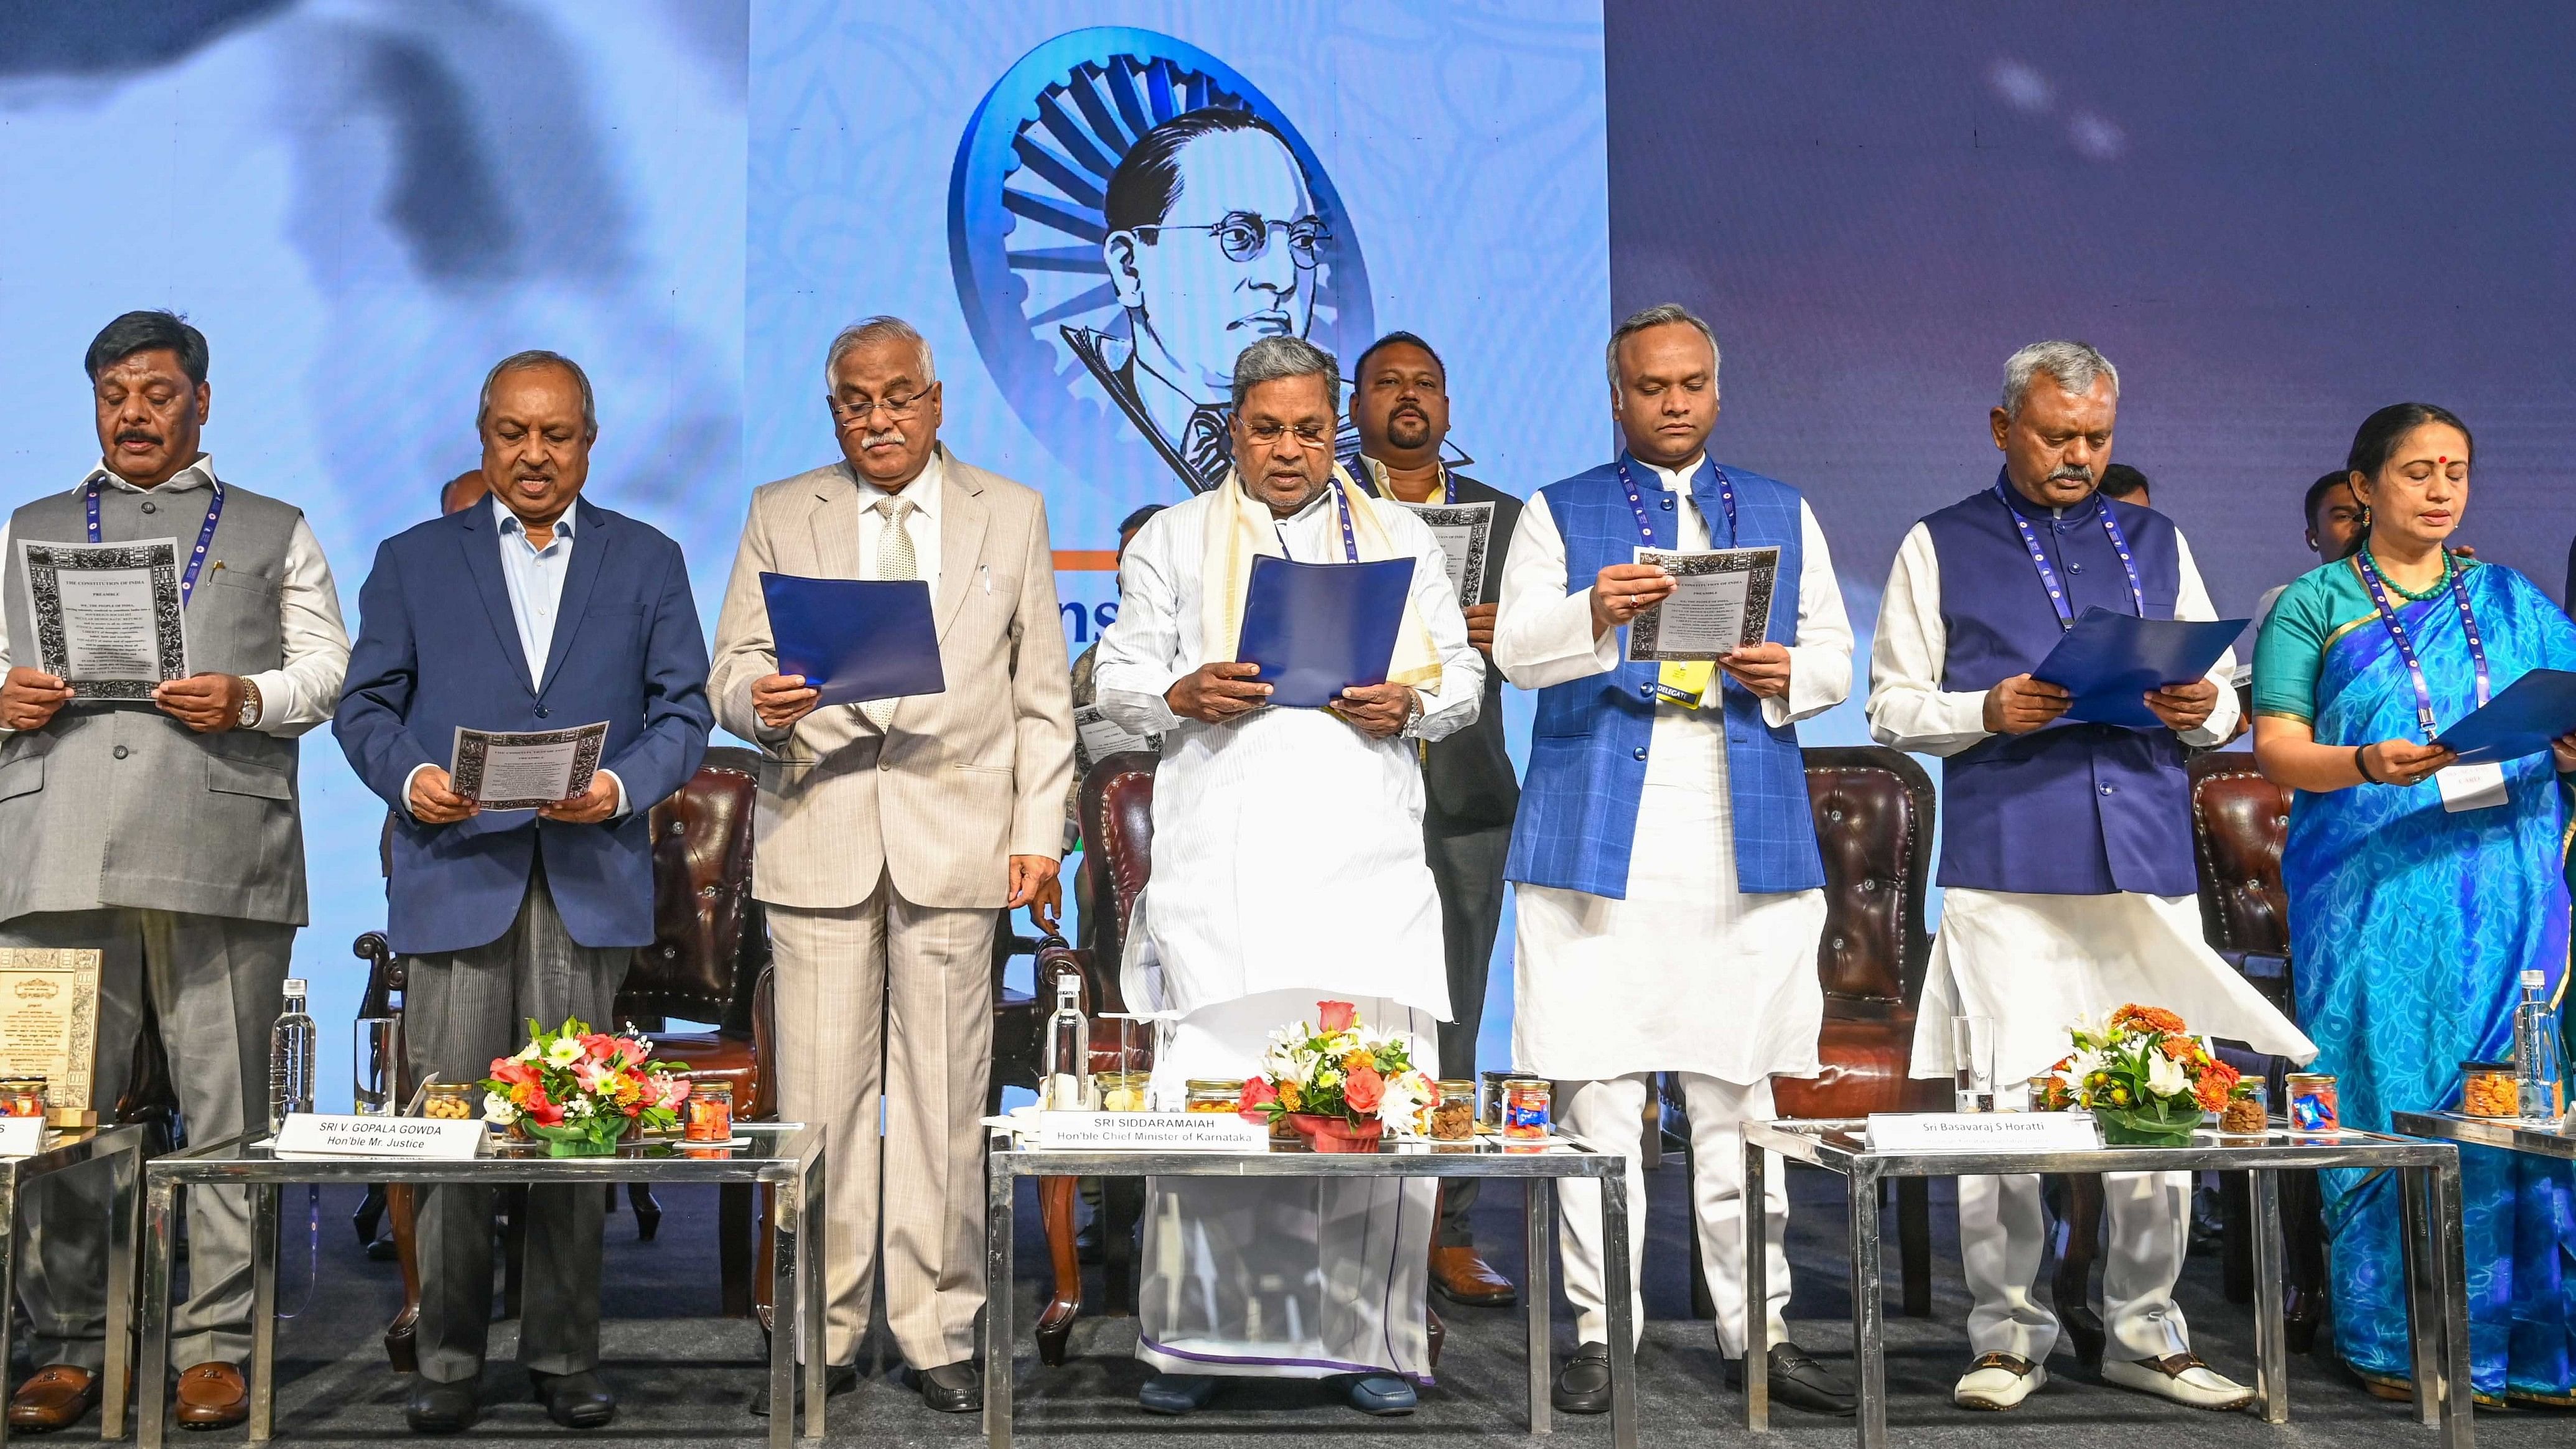 <div class="paragraphs"><p>Chief Minister Siddaramaiah reads the Preamble of the Constitution at ‘Constitution and National Unity’ convention in Bengaluru on Saturday. He is accompanied by Minister H C Mahadevappa, retired High Court judge Justice H N Nagmohan Das and former Supreme Court judge V Gopala Gowda, Minister Priyank Kharge, MLA S T Somashekar and additional chief secretary Shalini Rajneesh.&nbsp;</p></div>